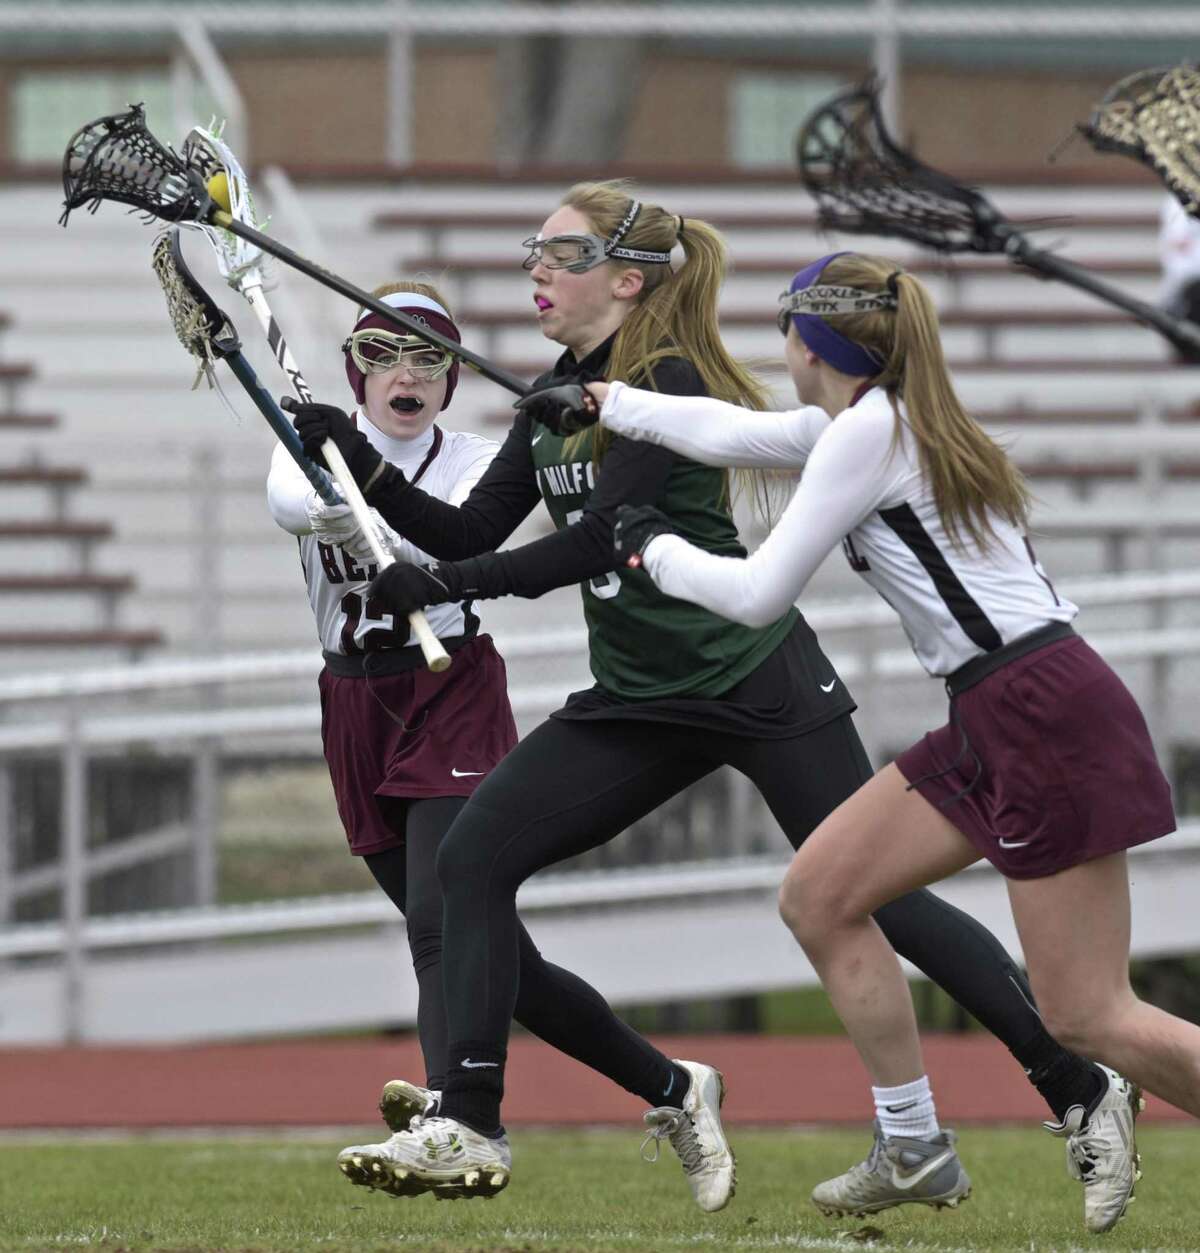 New Milford's Kelsie Baxter (9) squeezes between Bethel's Caroline Nordmann (12) and Victoria Gracy (2) to score a goal in the girls lacrosse game between New Milford and Bethel high schools, Saturday, April 7, 2018, at Bethel High School, Bethel, Conn.